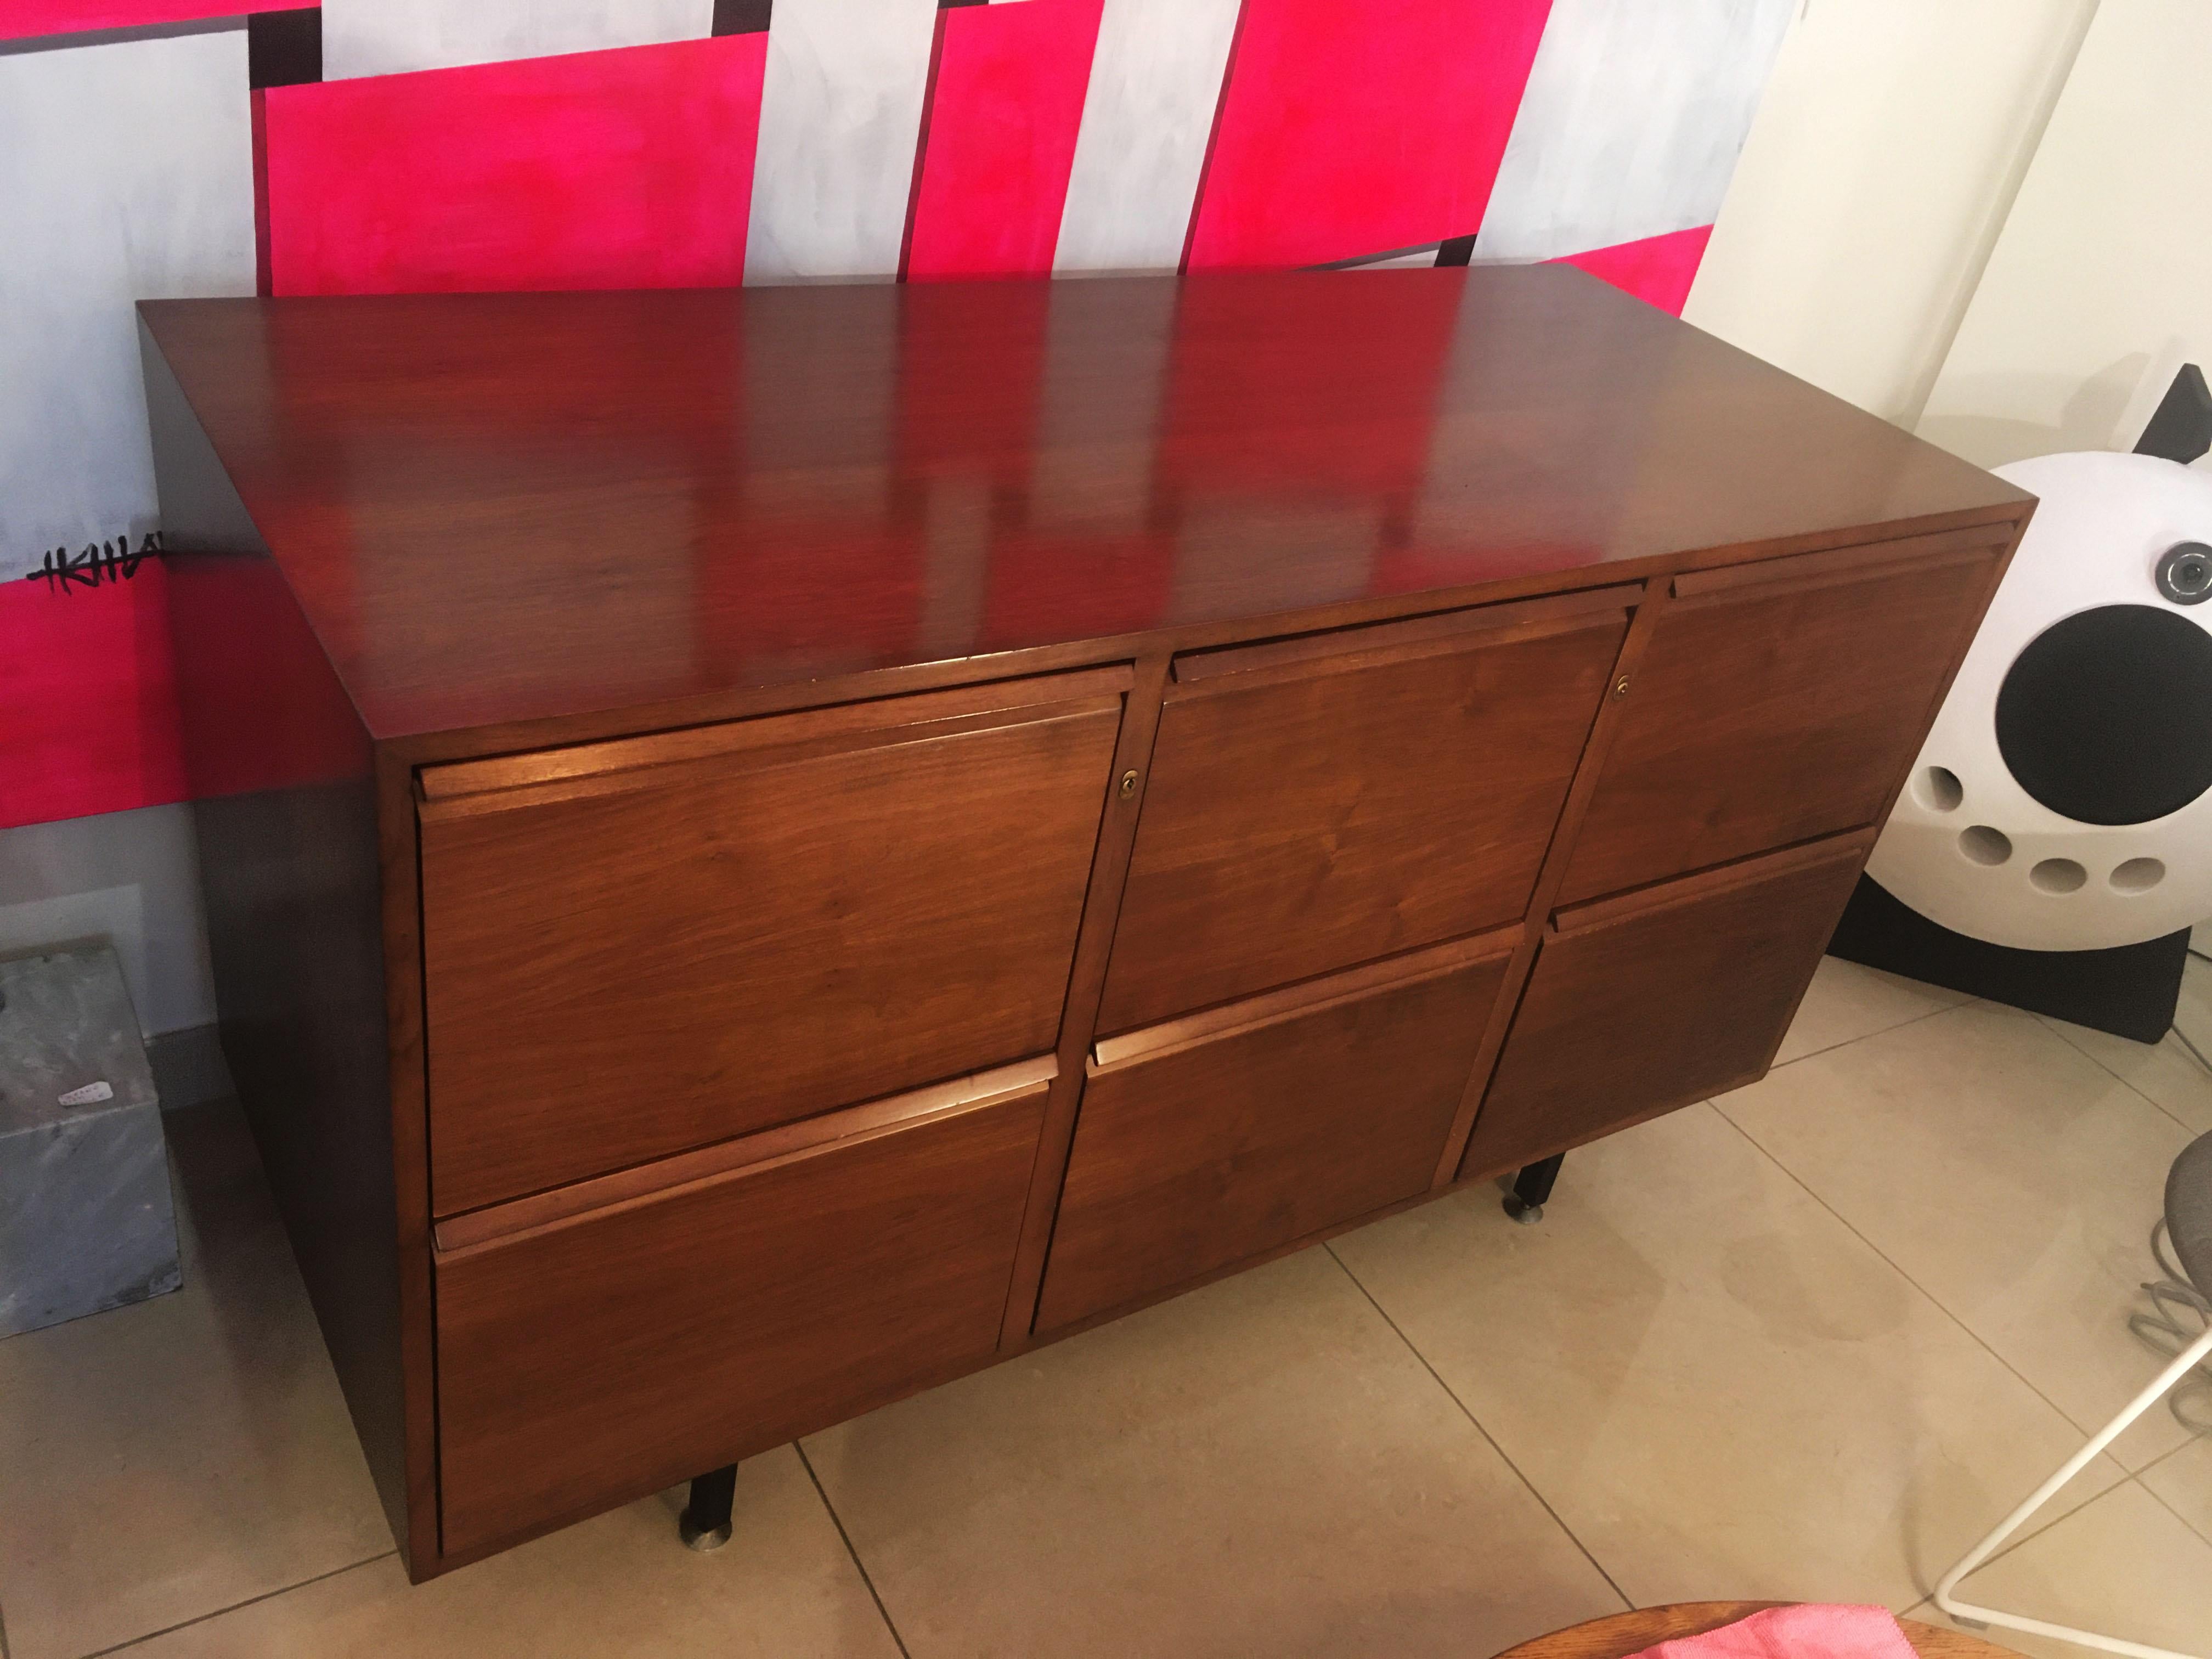 Belgian 6 drawer 2-row chest of drawers,
1960
Measures: L 145 x W 62 x H 86
Teak, 1600.